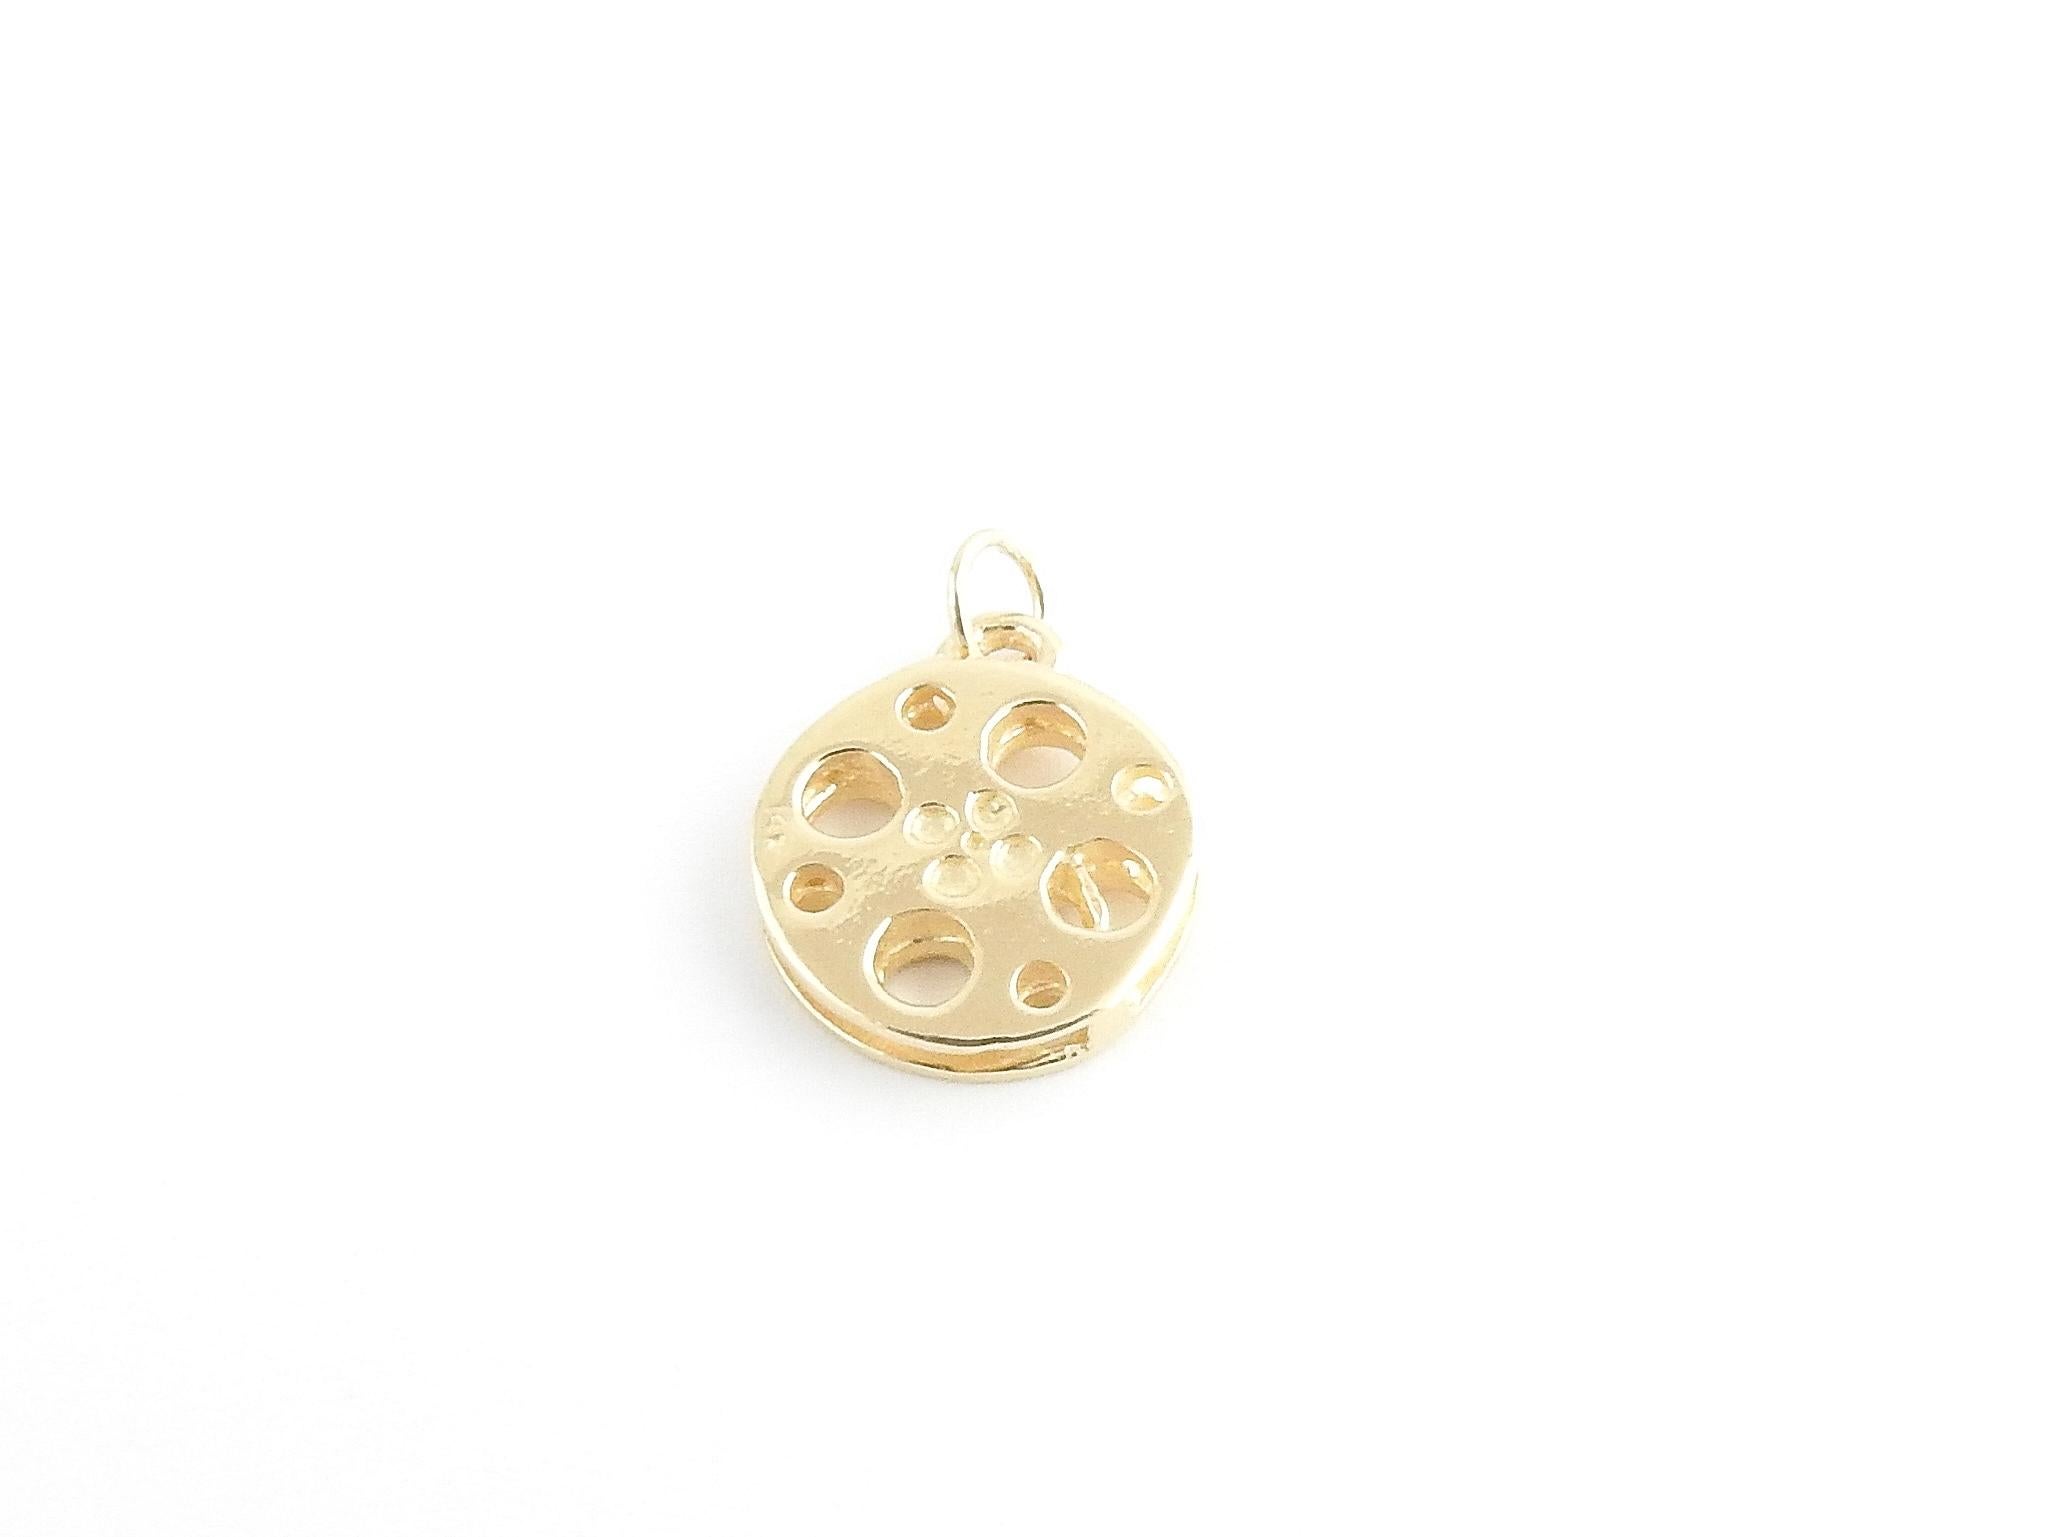 Vintage 14 Karat Yellow Gold Film Reel Charm

Perfect for the aspiring actor or film maker!

This lovely 3D charm features a miniature film reel meticulously detailed in 14K yellow gold.

Size: 15 mm x 13 mm (actual charm)

Weight: 1.4 dwt. / 2.2